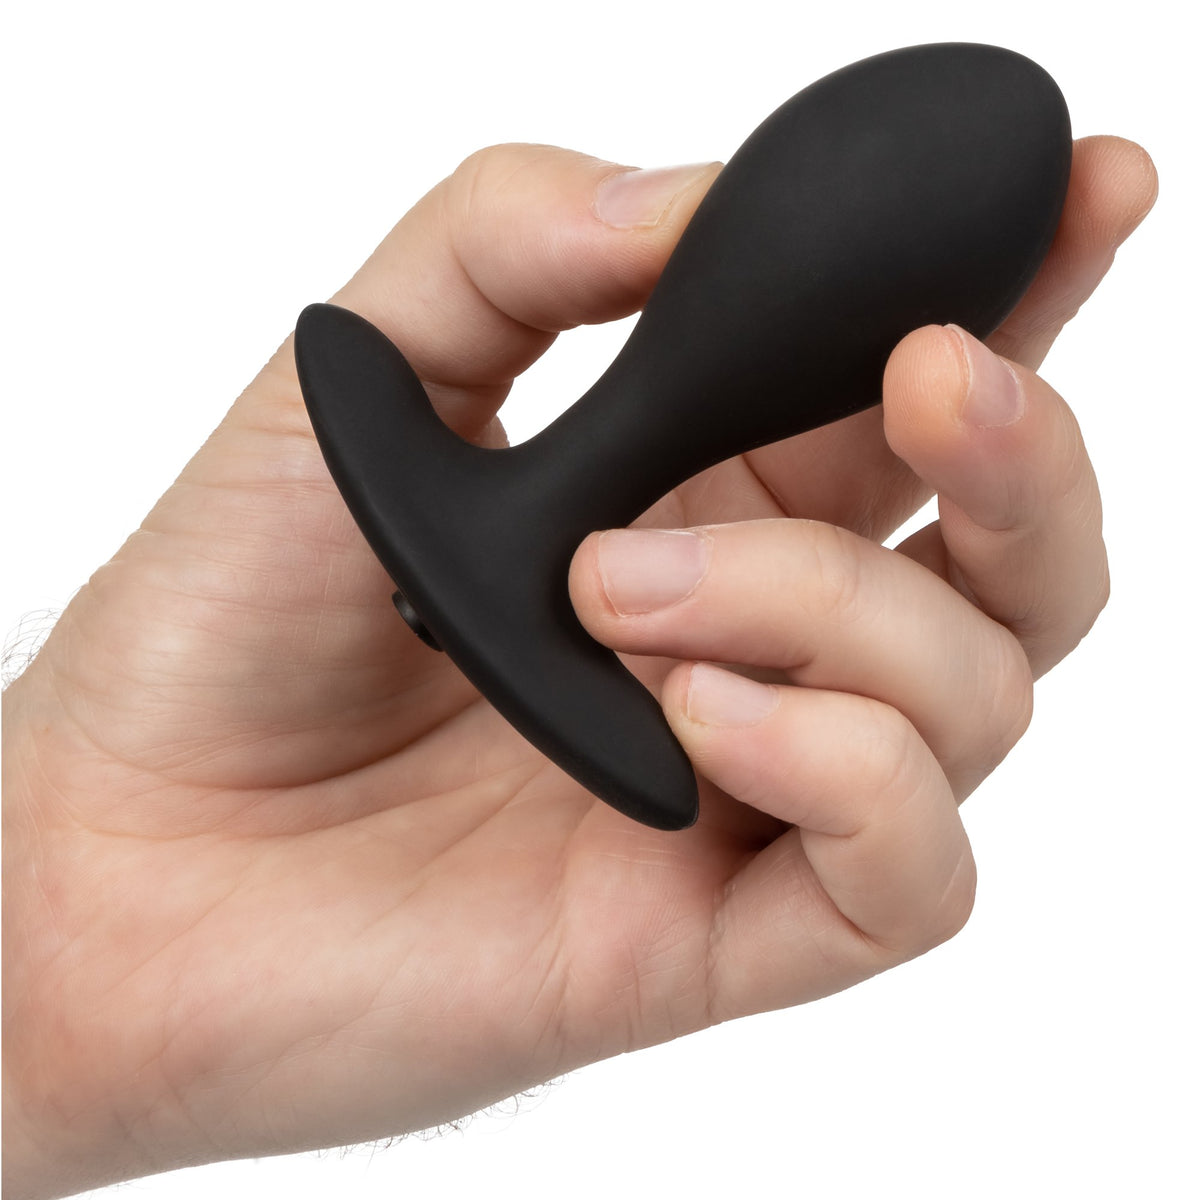 CalExotics Weighted Silicone Inflatable Plug - Black